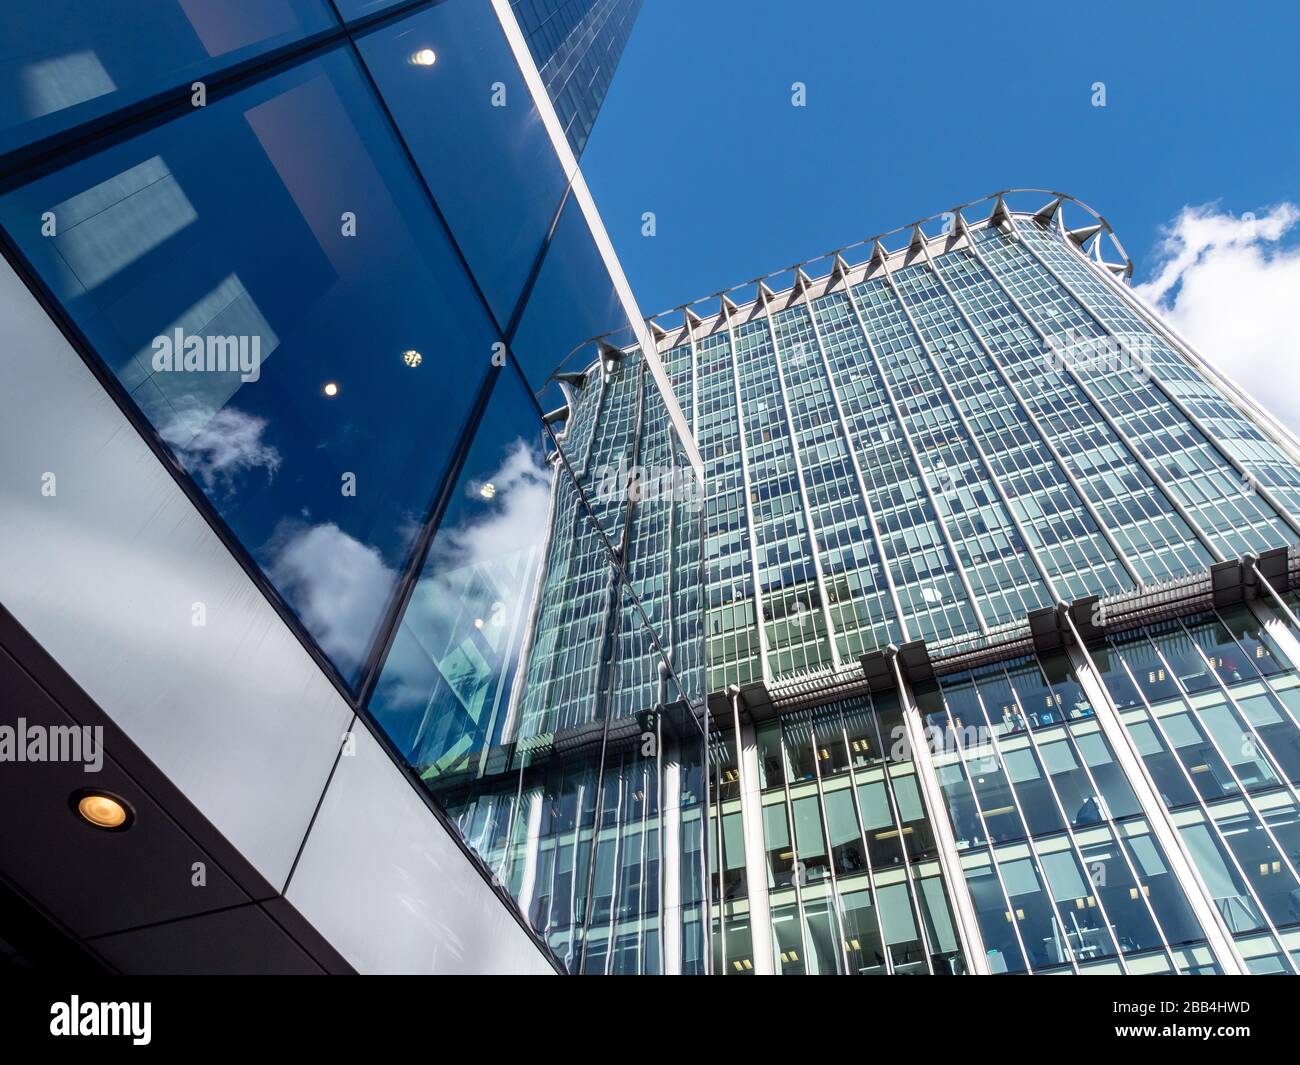 London skyscrapers. A low, wide angle view of anonymous modern architecture within the financial heart of the City of London. Stock Photo